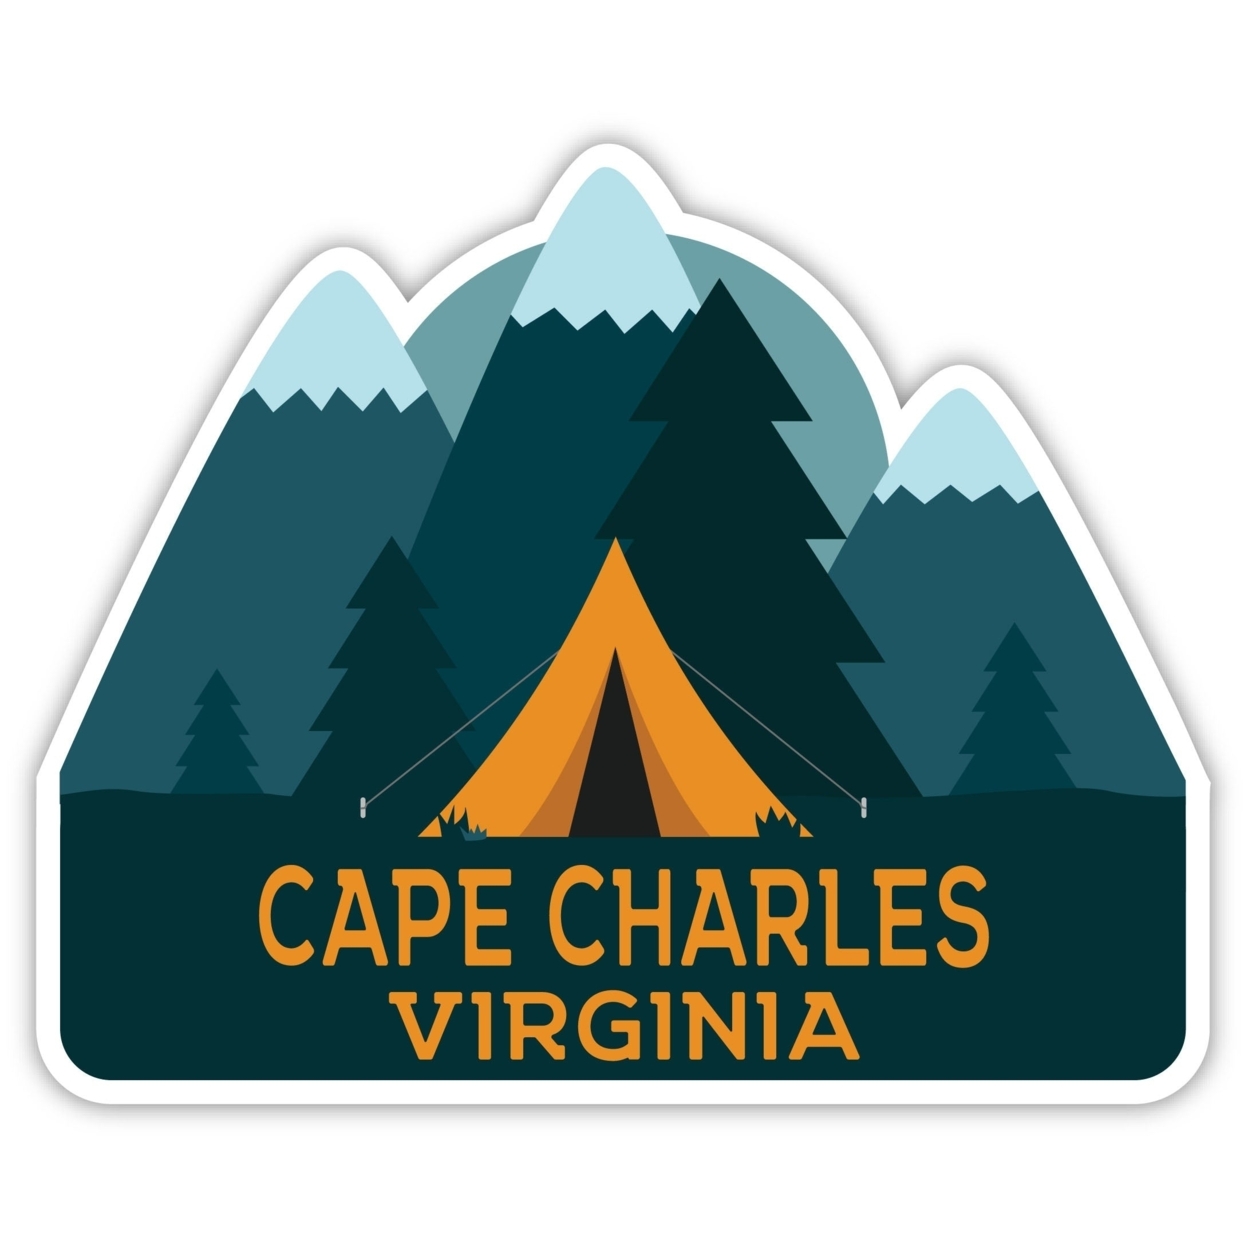 Cape Charles Virginia Souvenir Decorative Stickers (Choose Theme And Size) - 4-Pack, 6-Inch, Tent